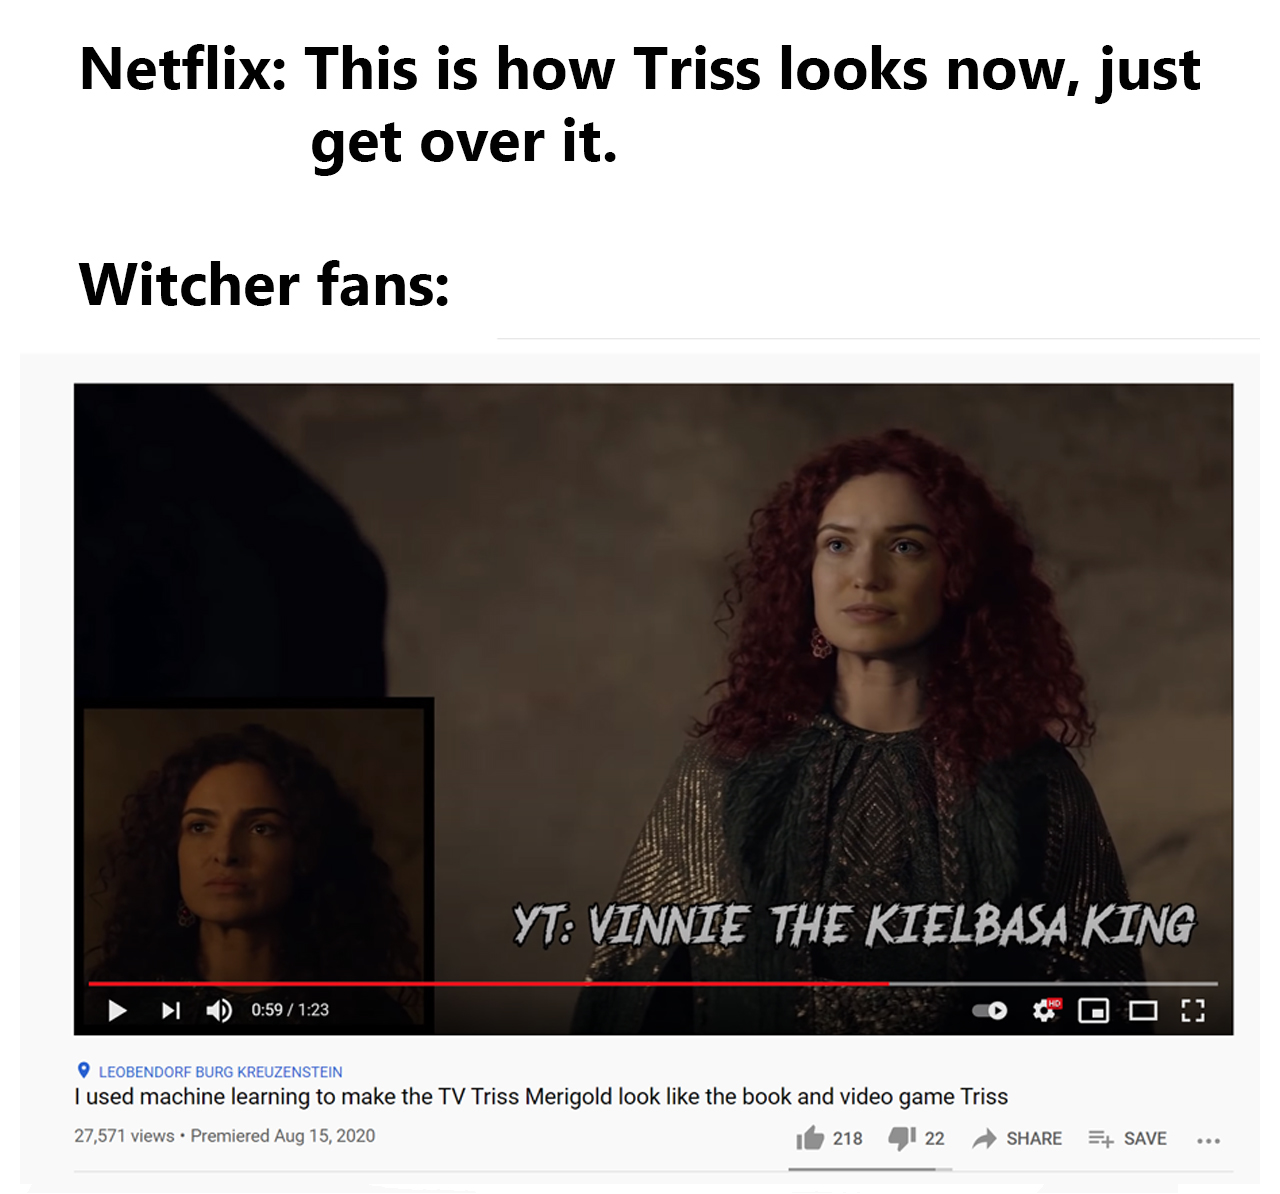 order of operations - Netflix This is how Triss looks now, just get over it. Witcher fans Yt Vinnie The Kielbasa King O Leobendorf Burg Kreuzenstein I used machine learning to make the Tv Triss Merigold look the book and video game Triss 27,571 views Prem